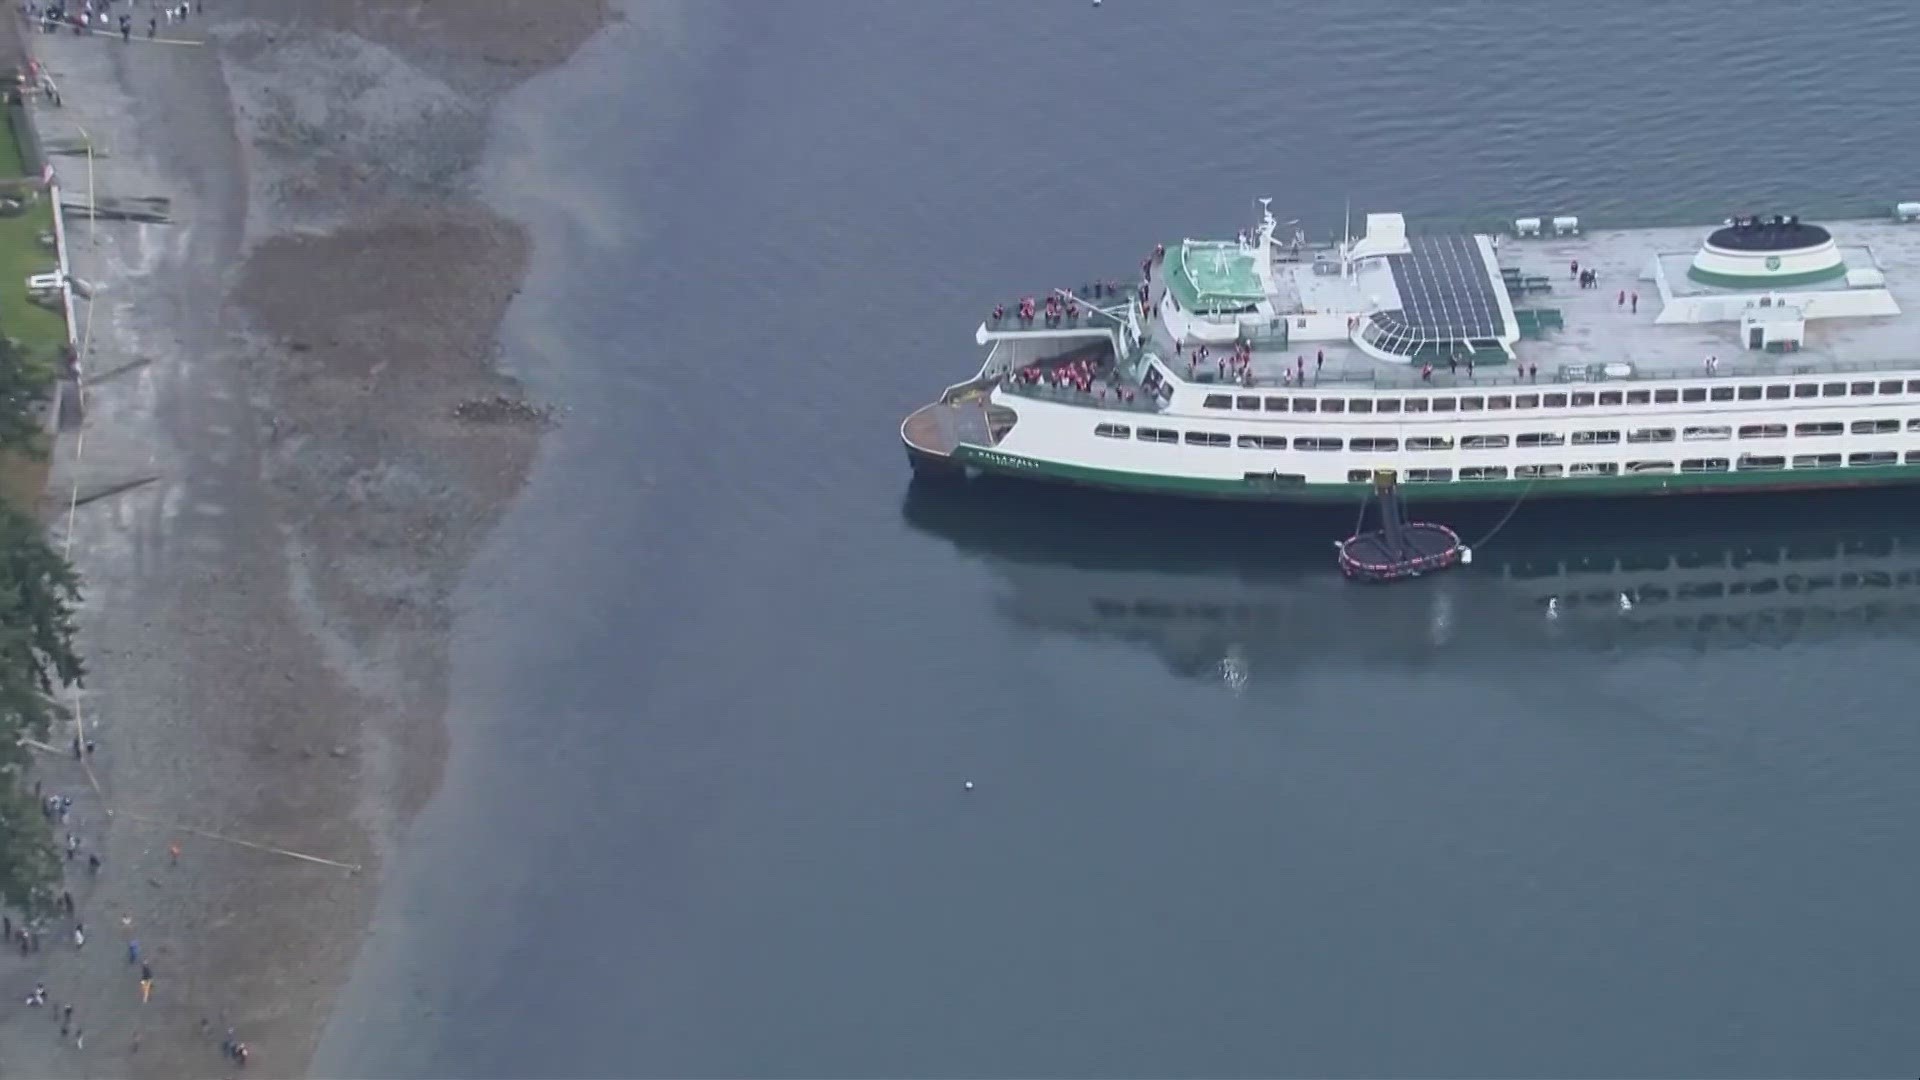 Divers inspected the hull of the ferry Walla Walla and determined it did not incur severe damage after the vessel grounded near Bainbridge Island Saturday night.